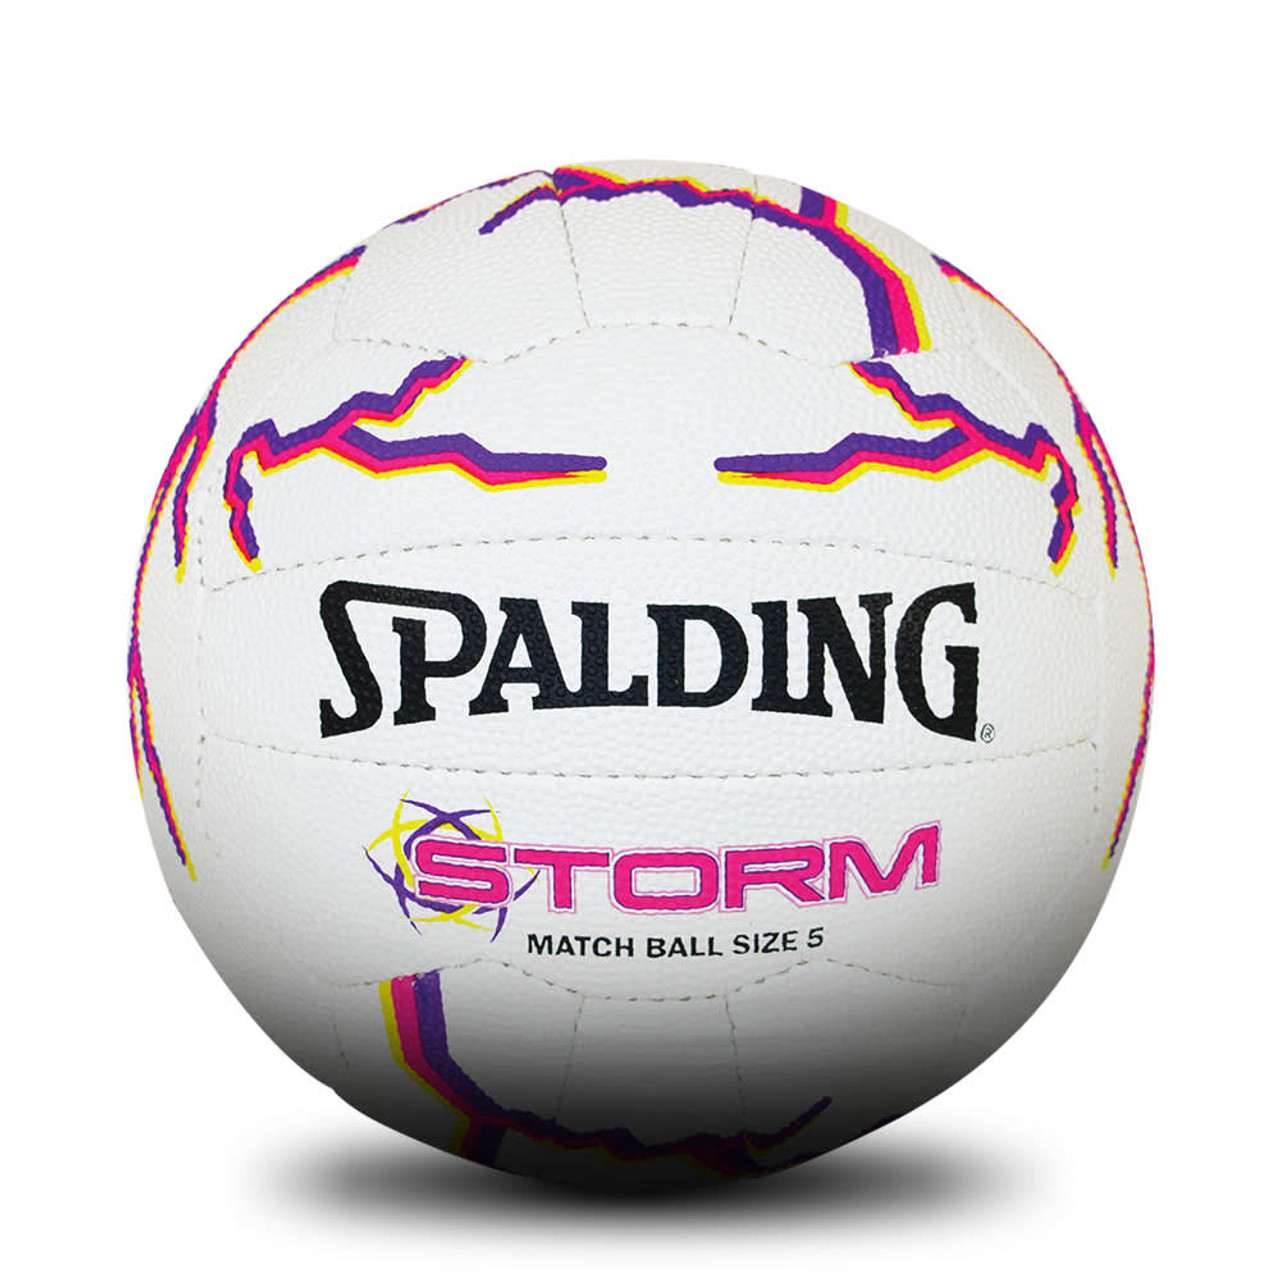 SPALDING Storm Netball - Kimberley Country Department Store